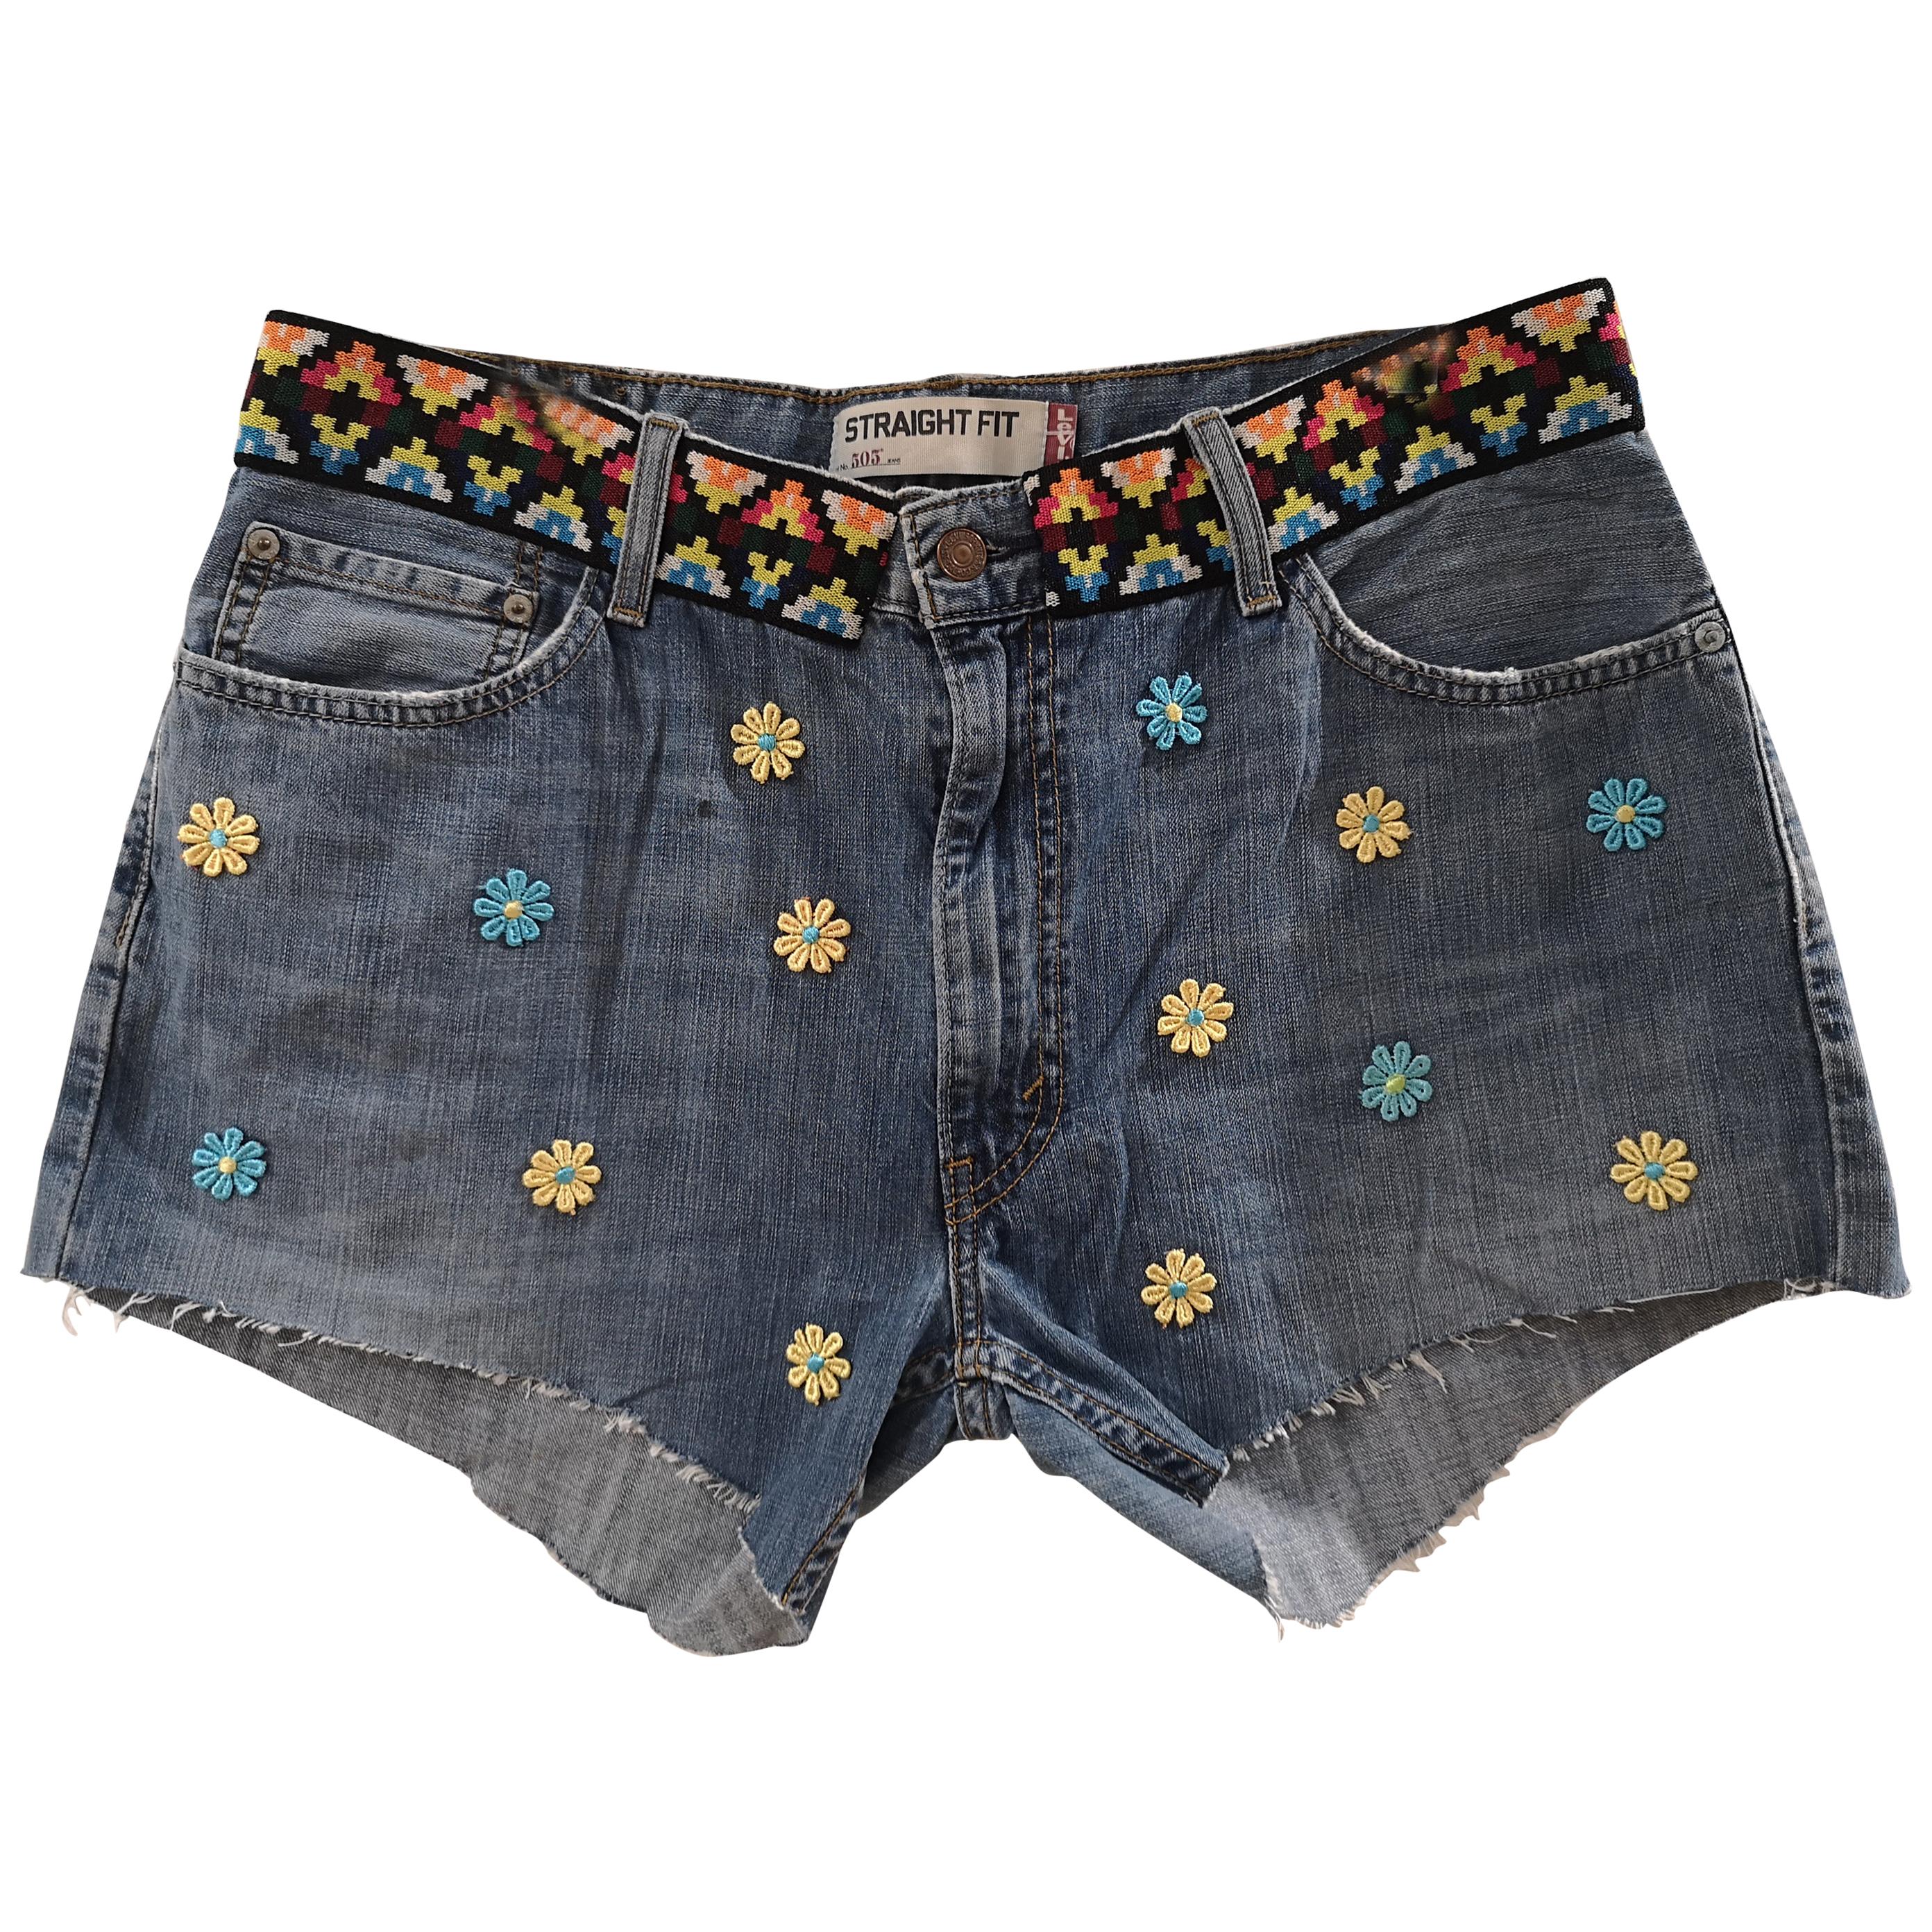 SOAB Blue cotton denim with flowers, passementerie and fringes shorts